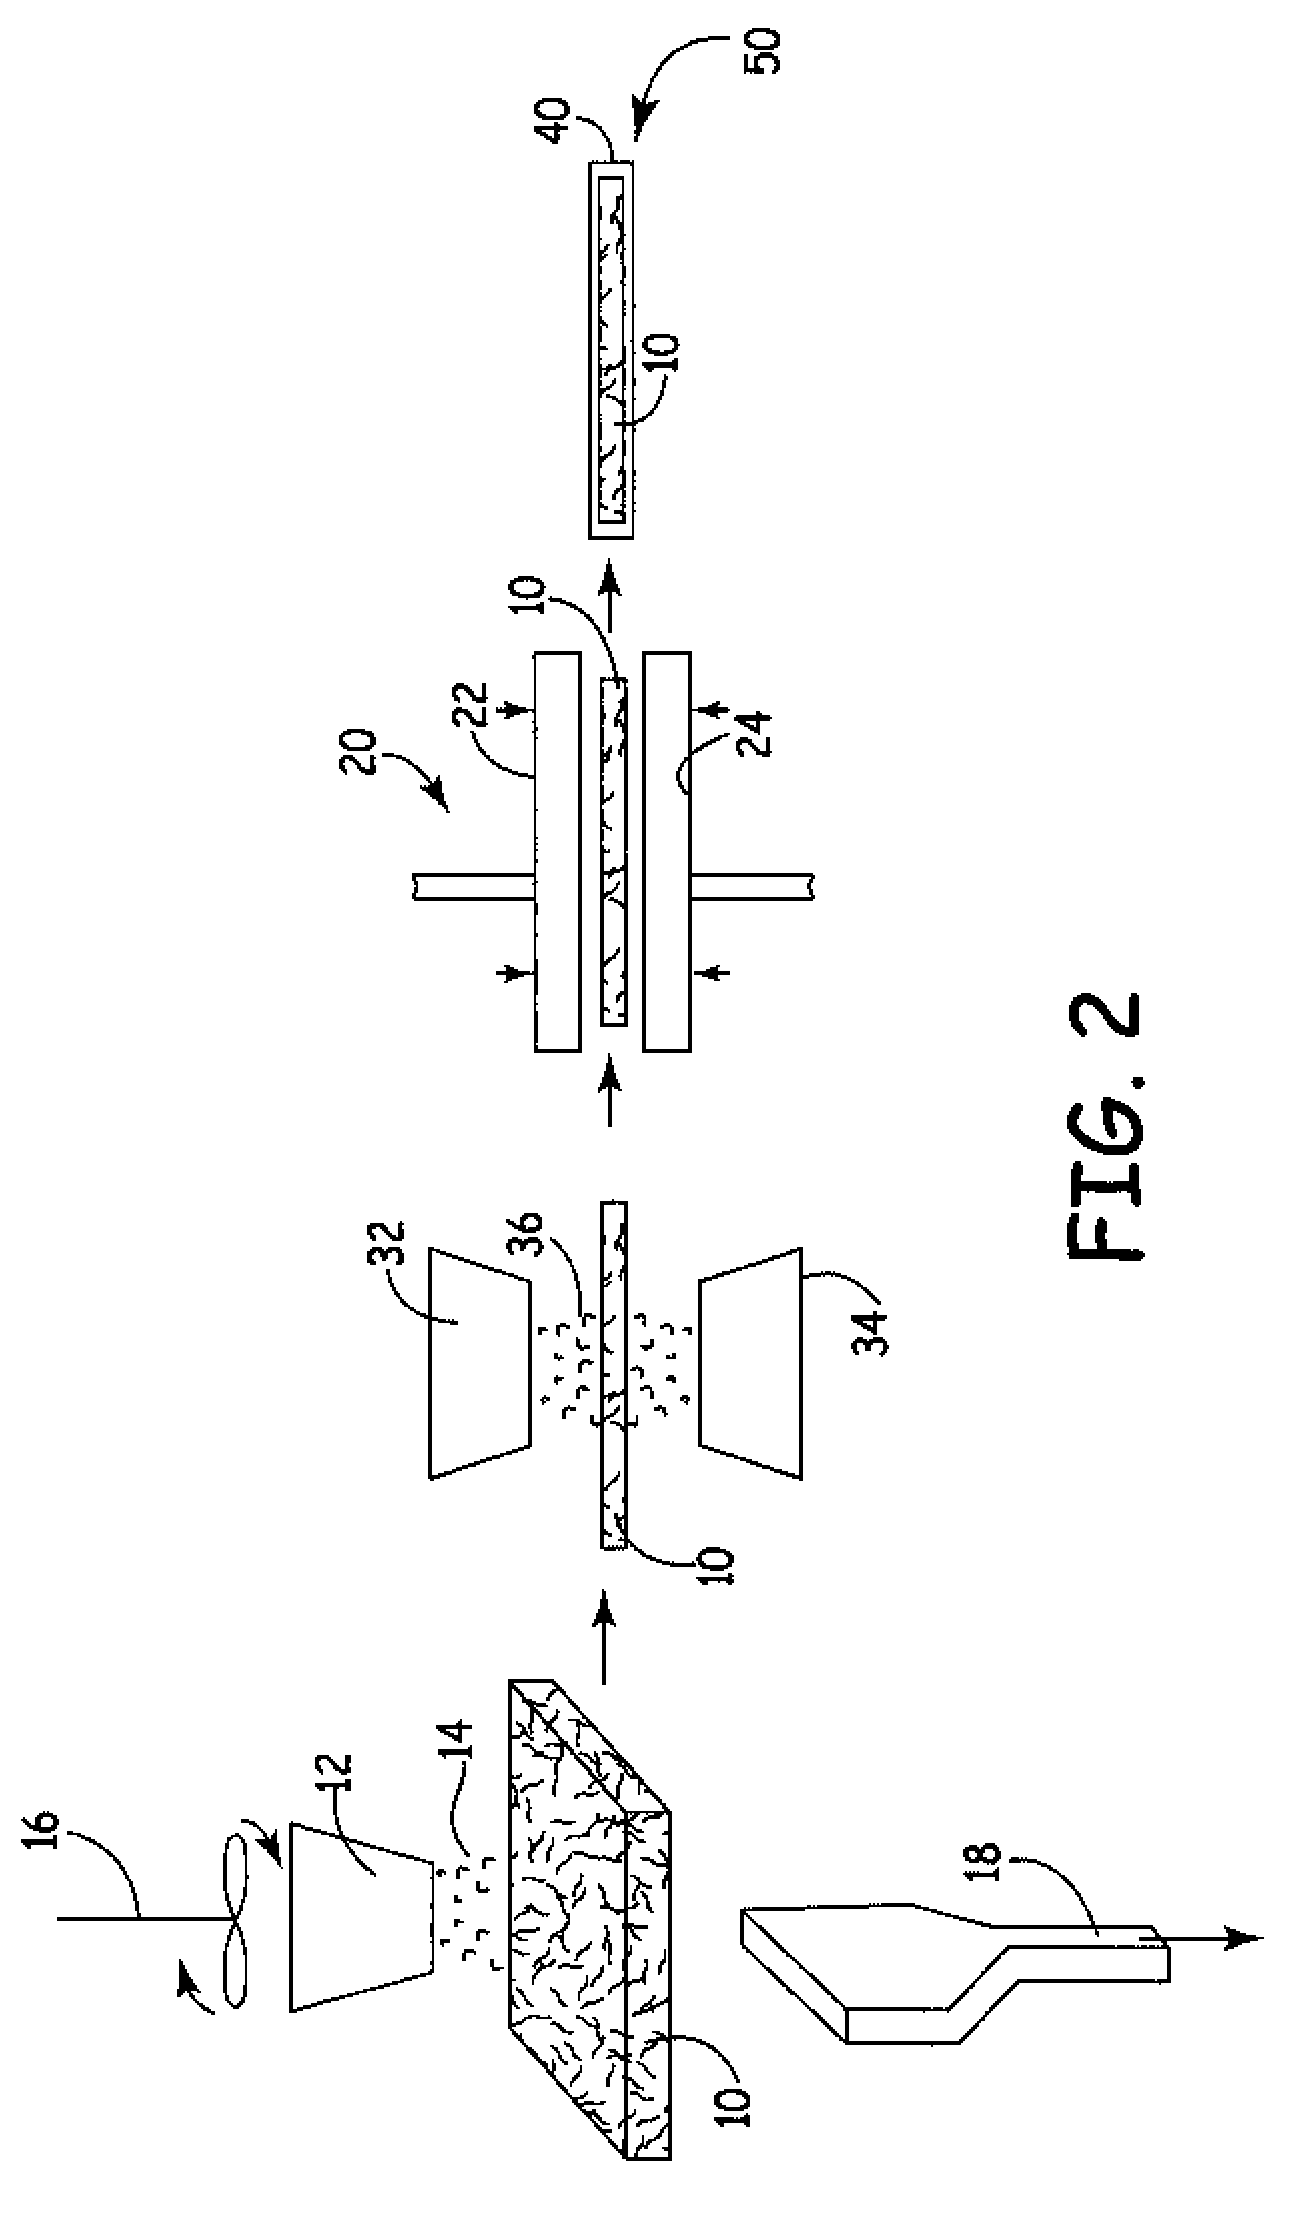 Fiber-containing article and method of manufacture